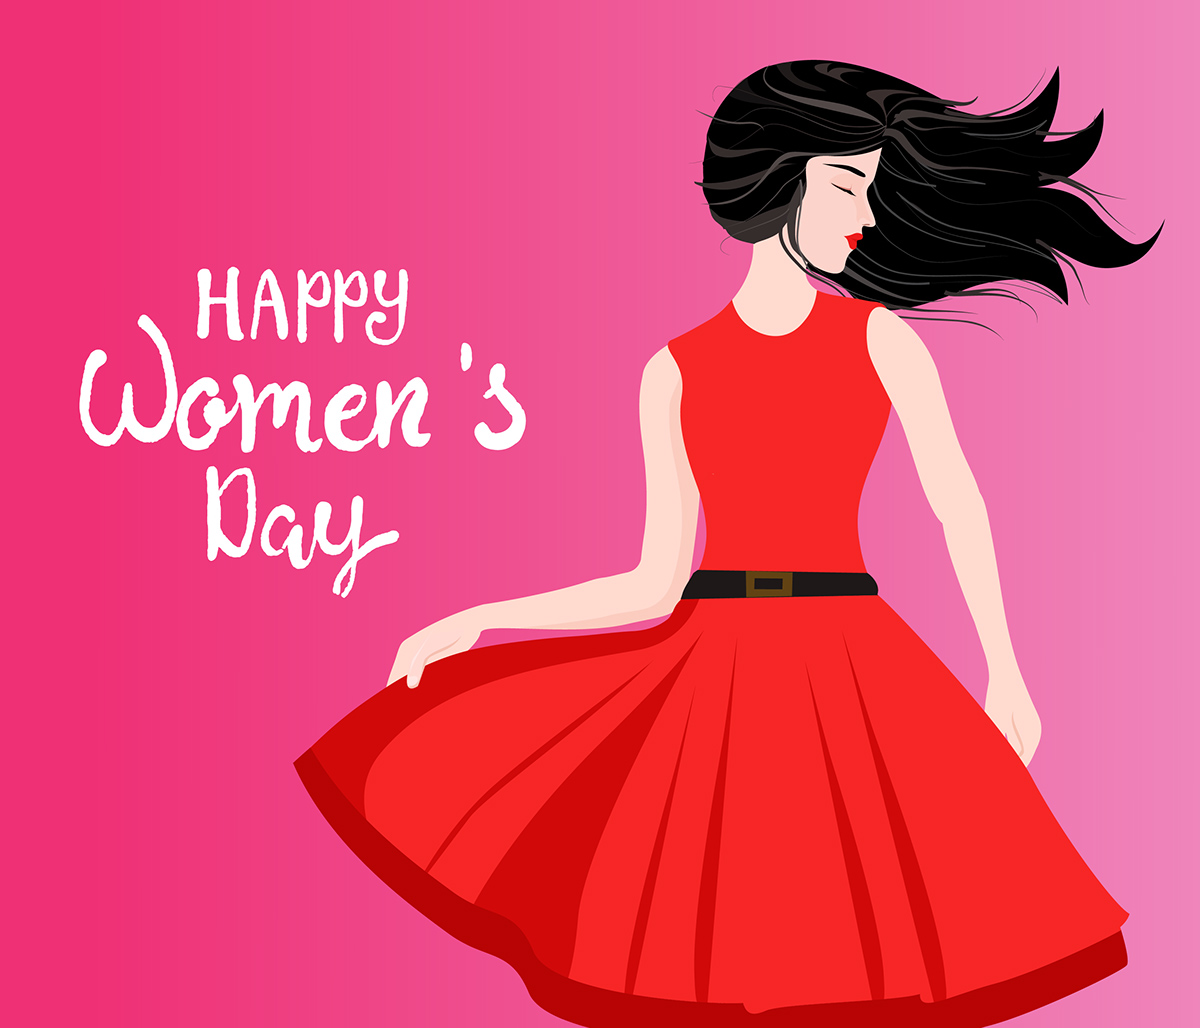 womens day girls march happy day protest rights attitude celebrate poster ILLUSTRATION 